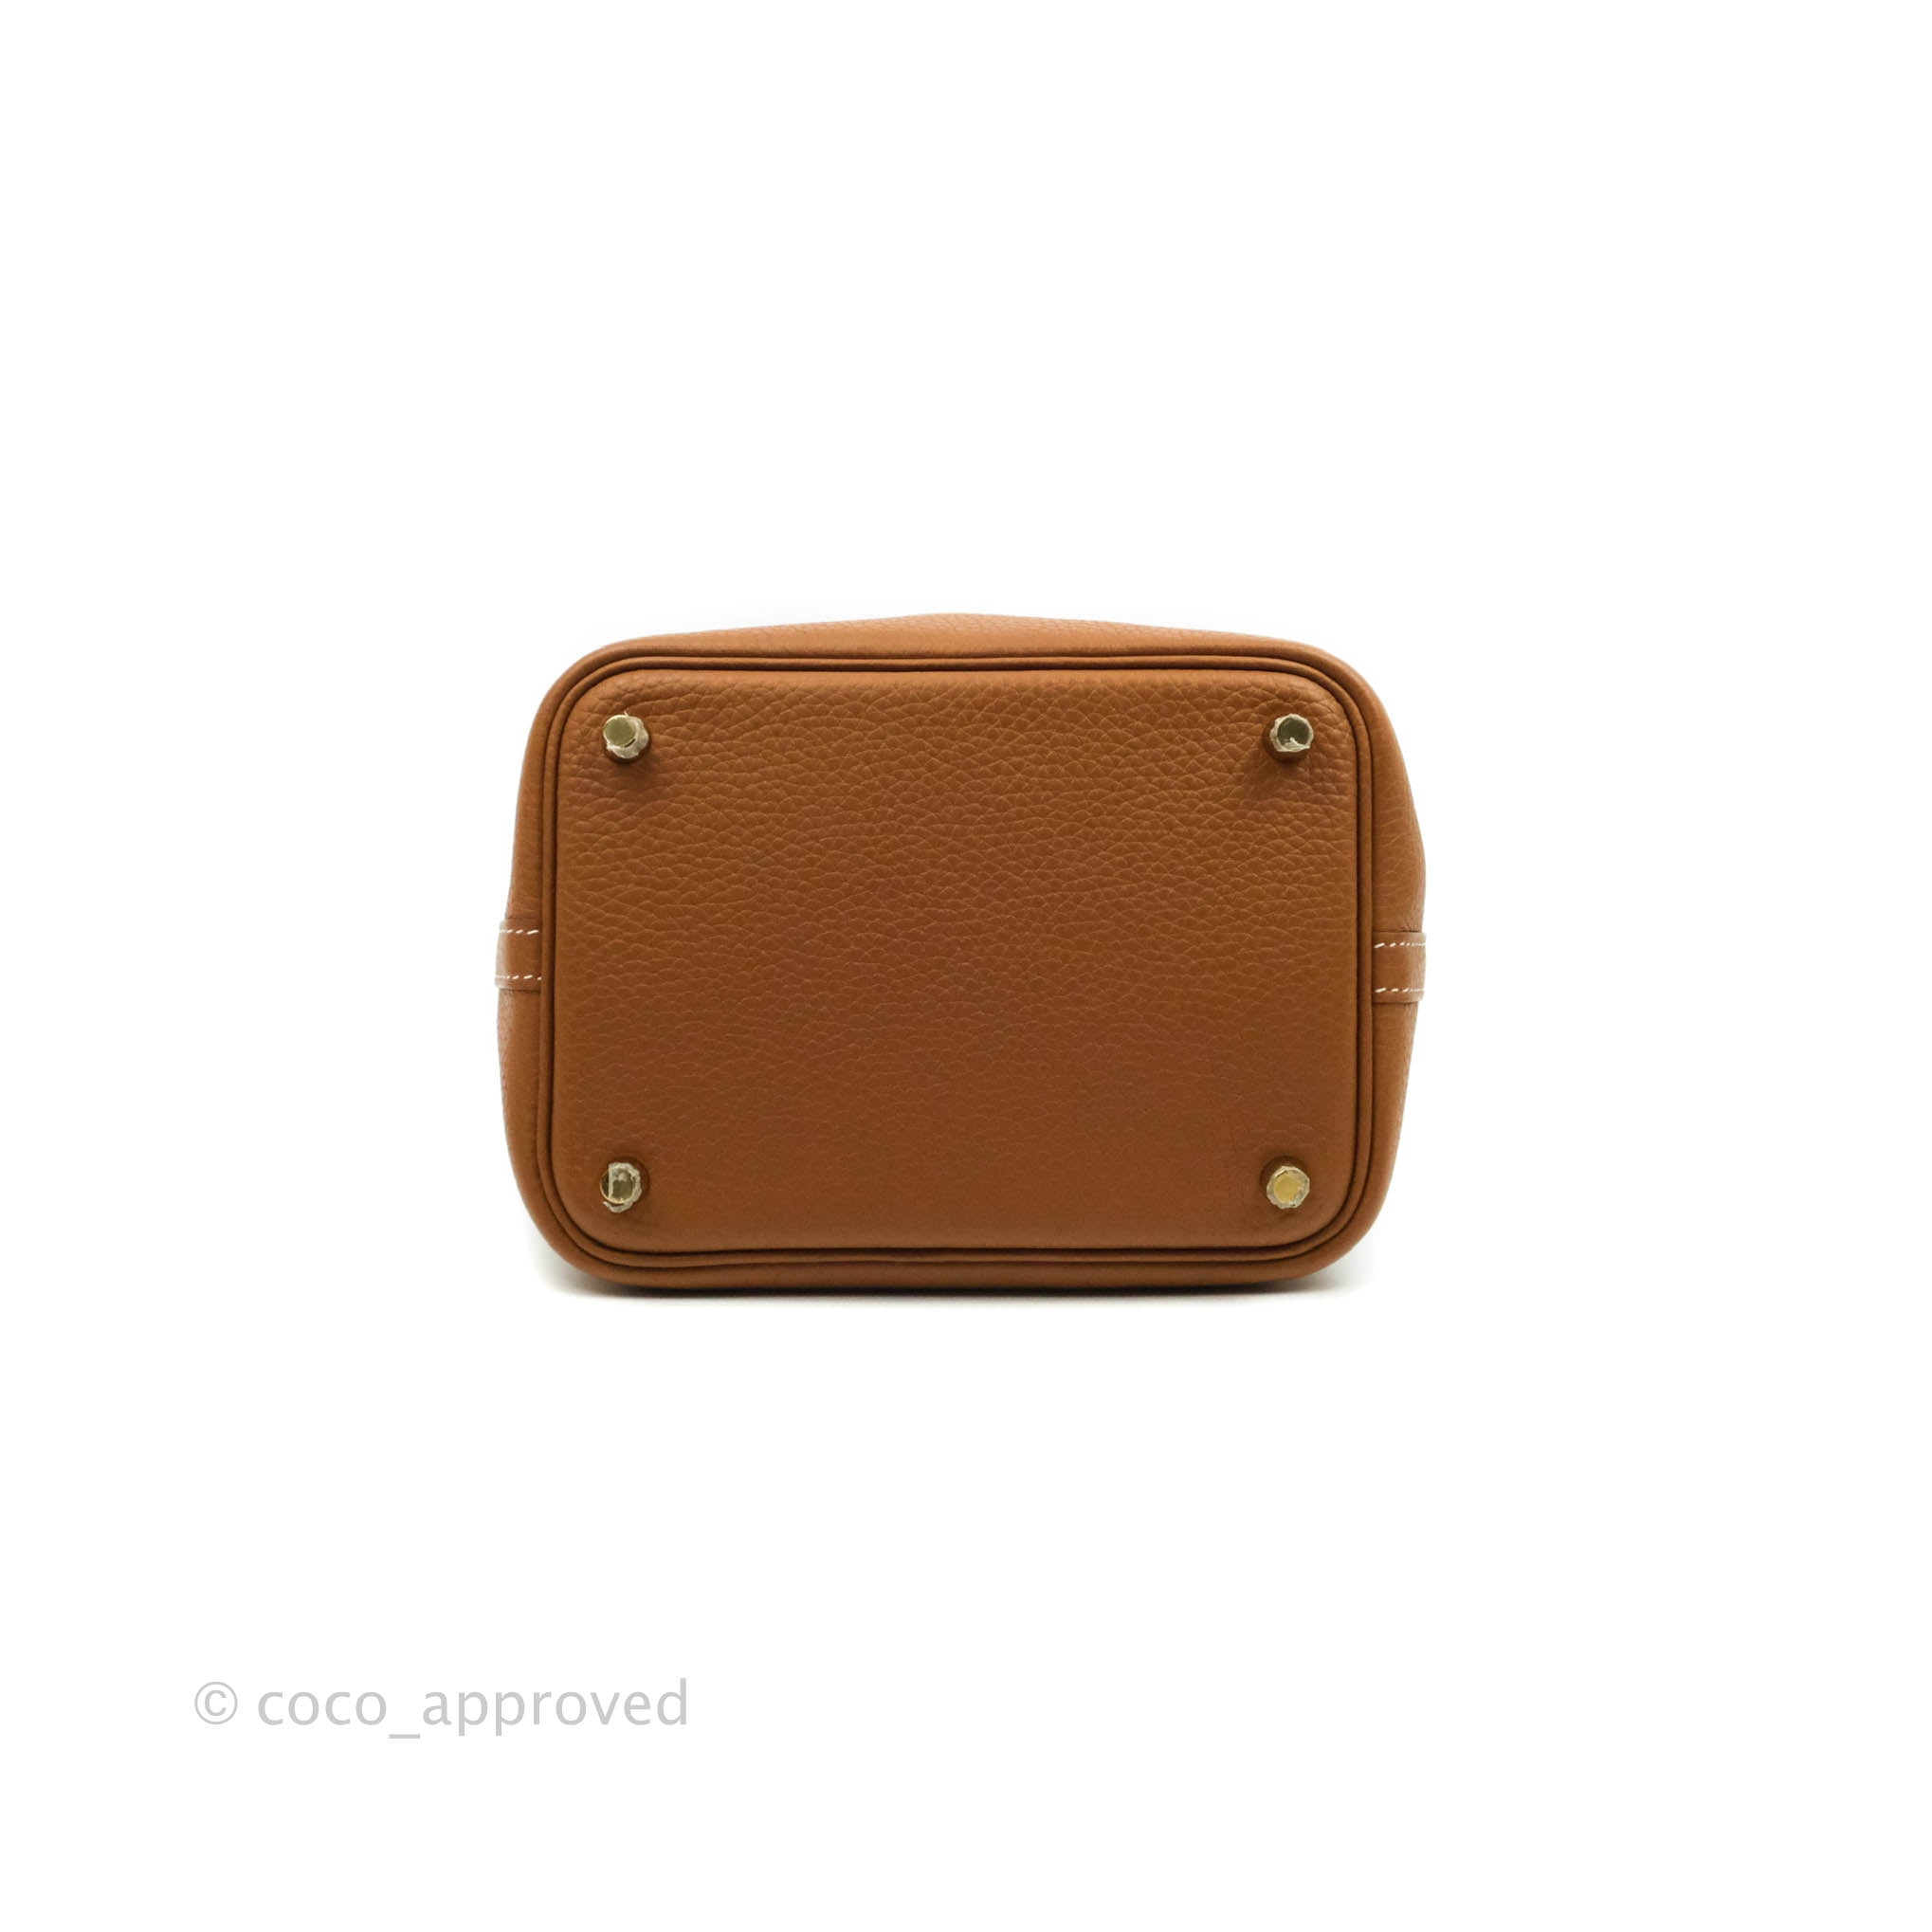 Hermes Picotin Lock 18 Rouge Casaque Clemence Gold Hardware – Mightychic